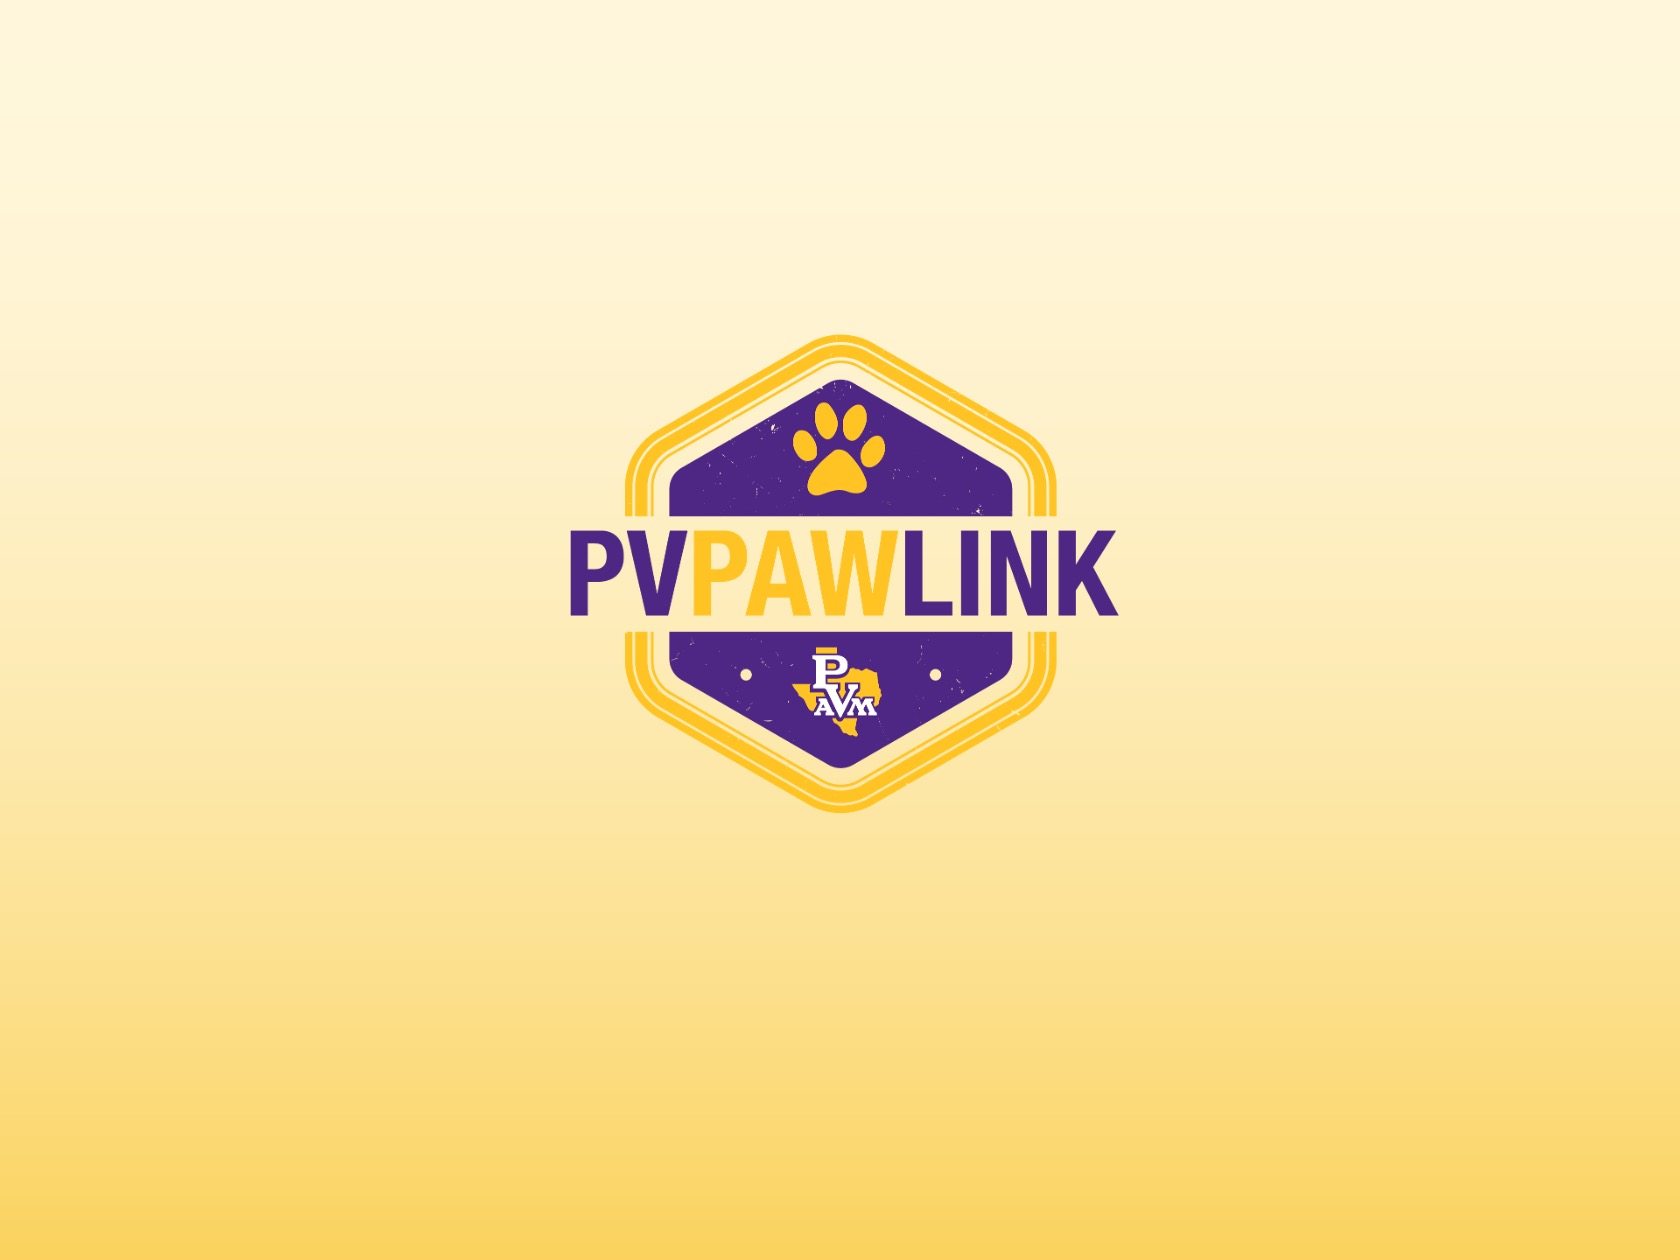 PVPAW Link Event Process